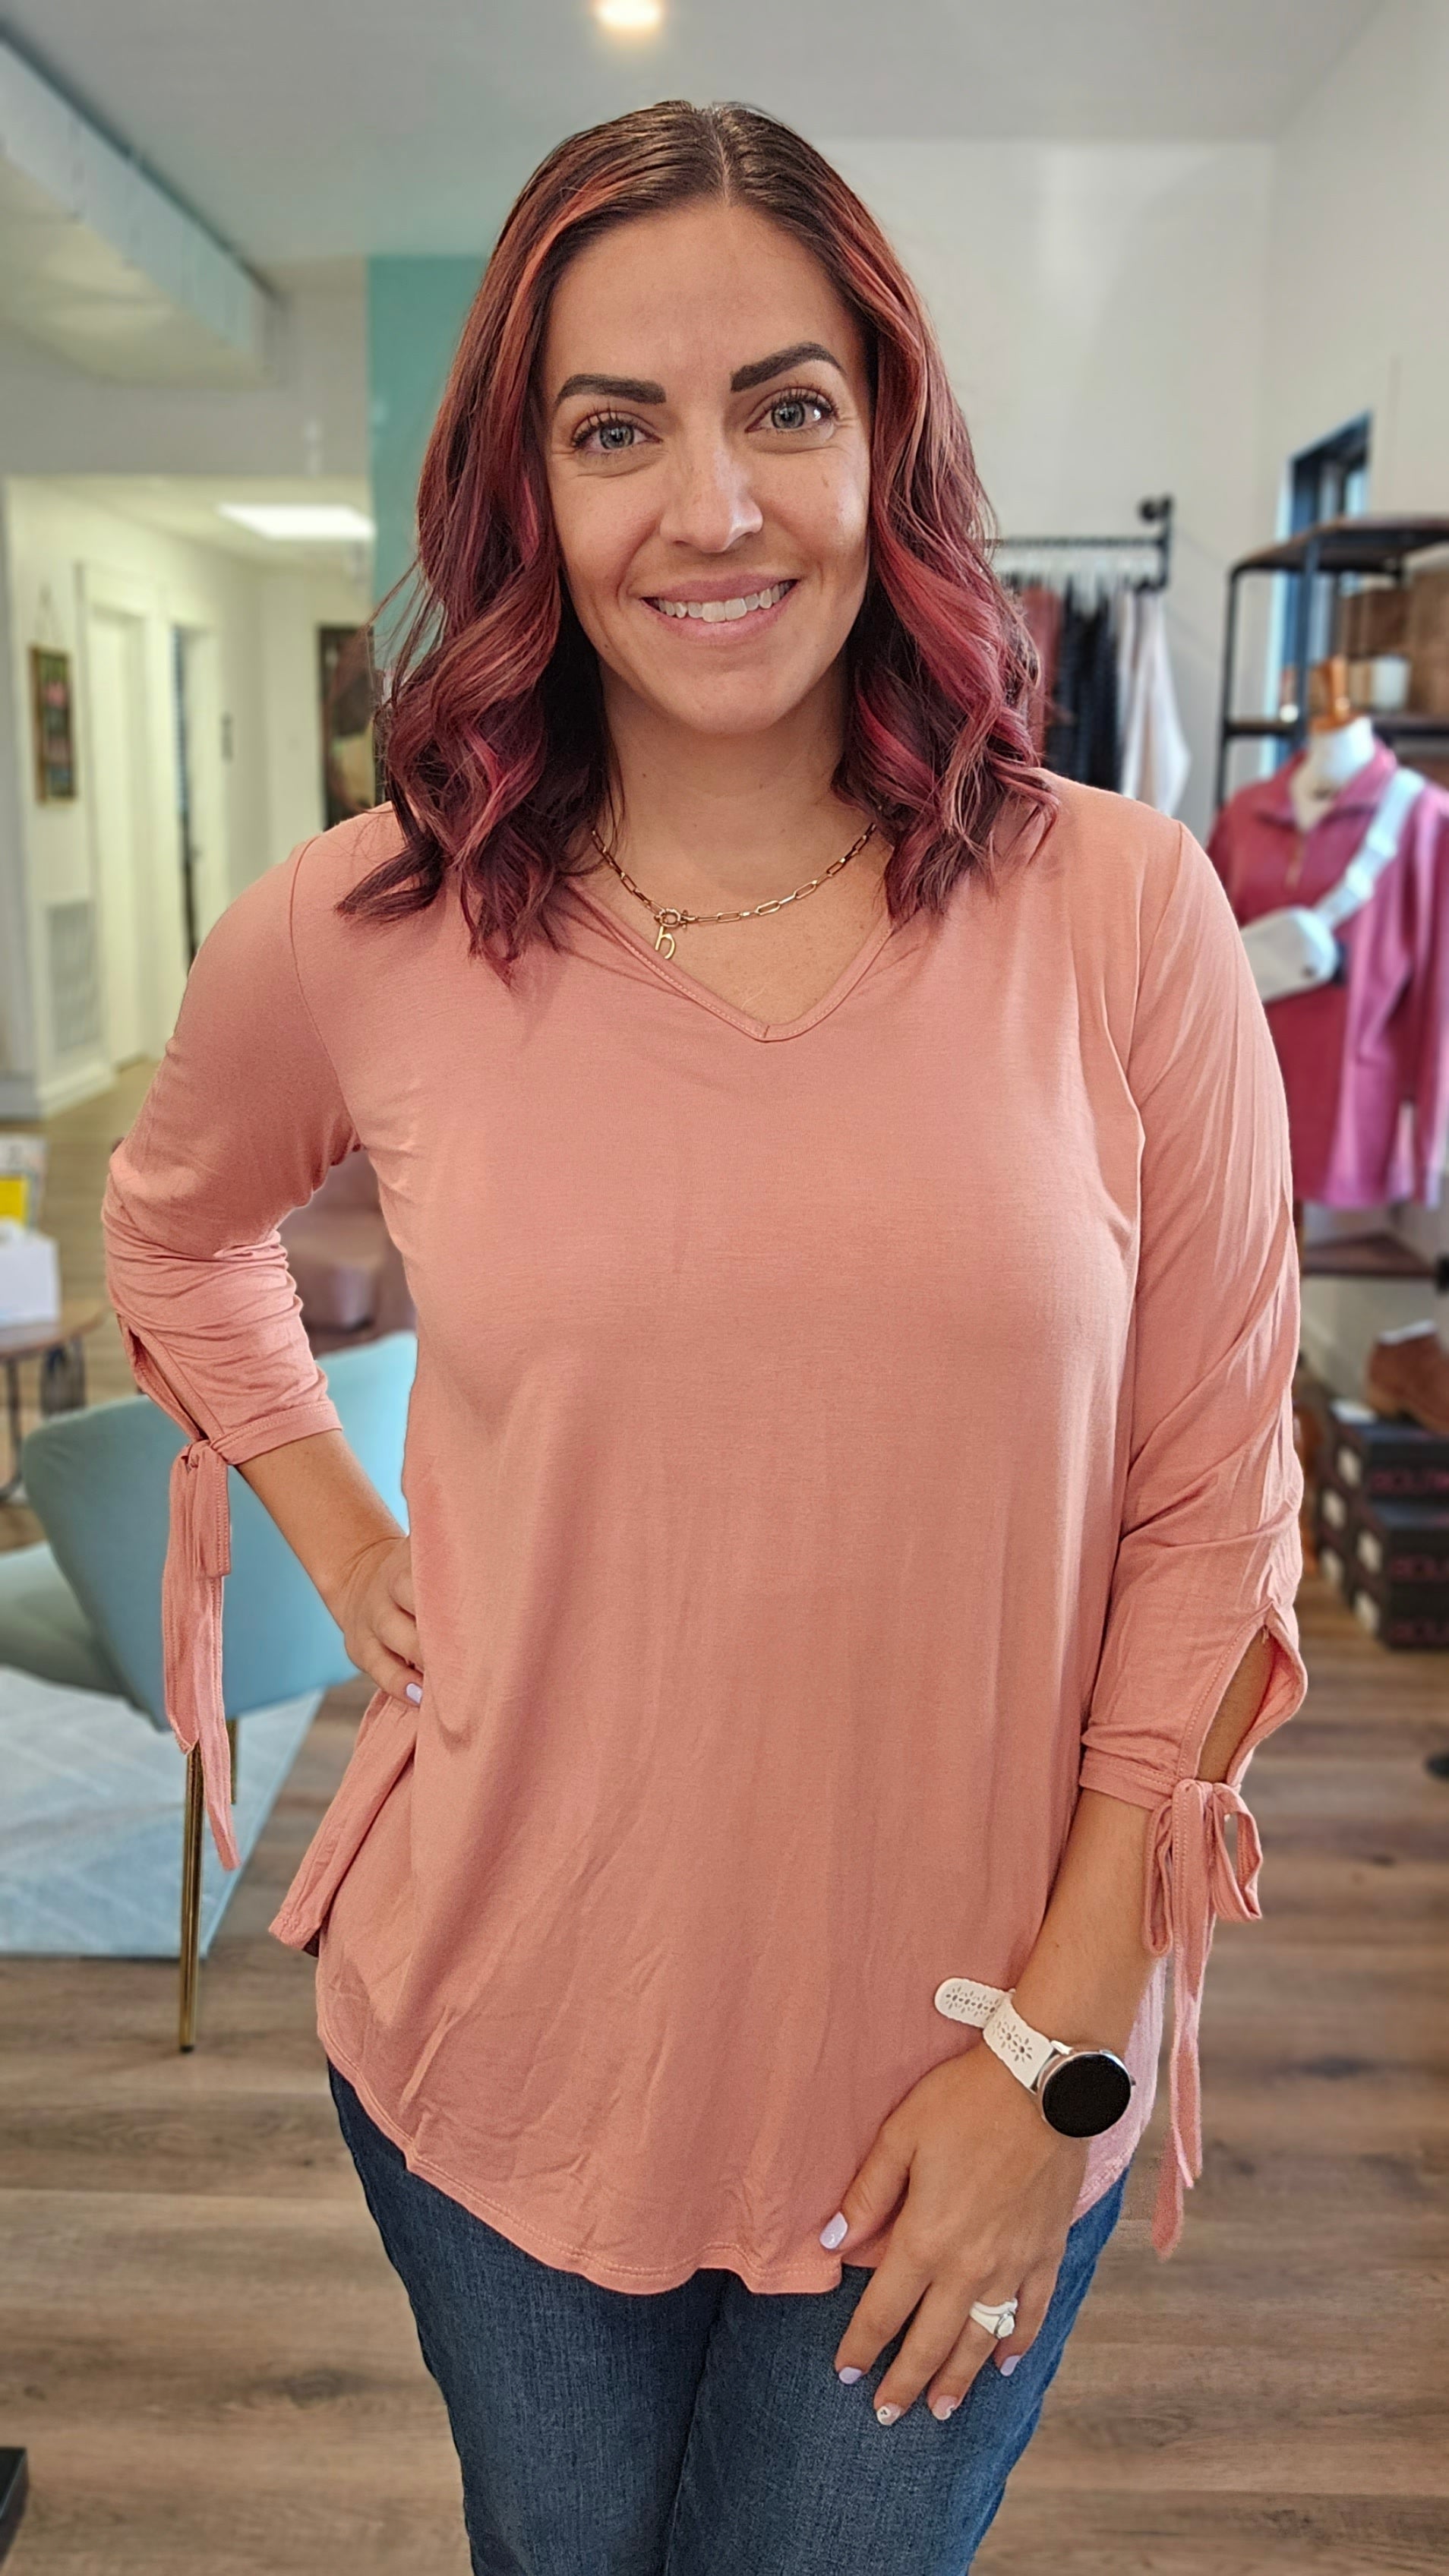 Shop Hailee Bamboo Tie Sleeve Top-Shirts & Tops at Ruby Joy Boutique, a Women's Clothing Store in Pickerington, Ohio